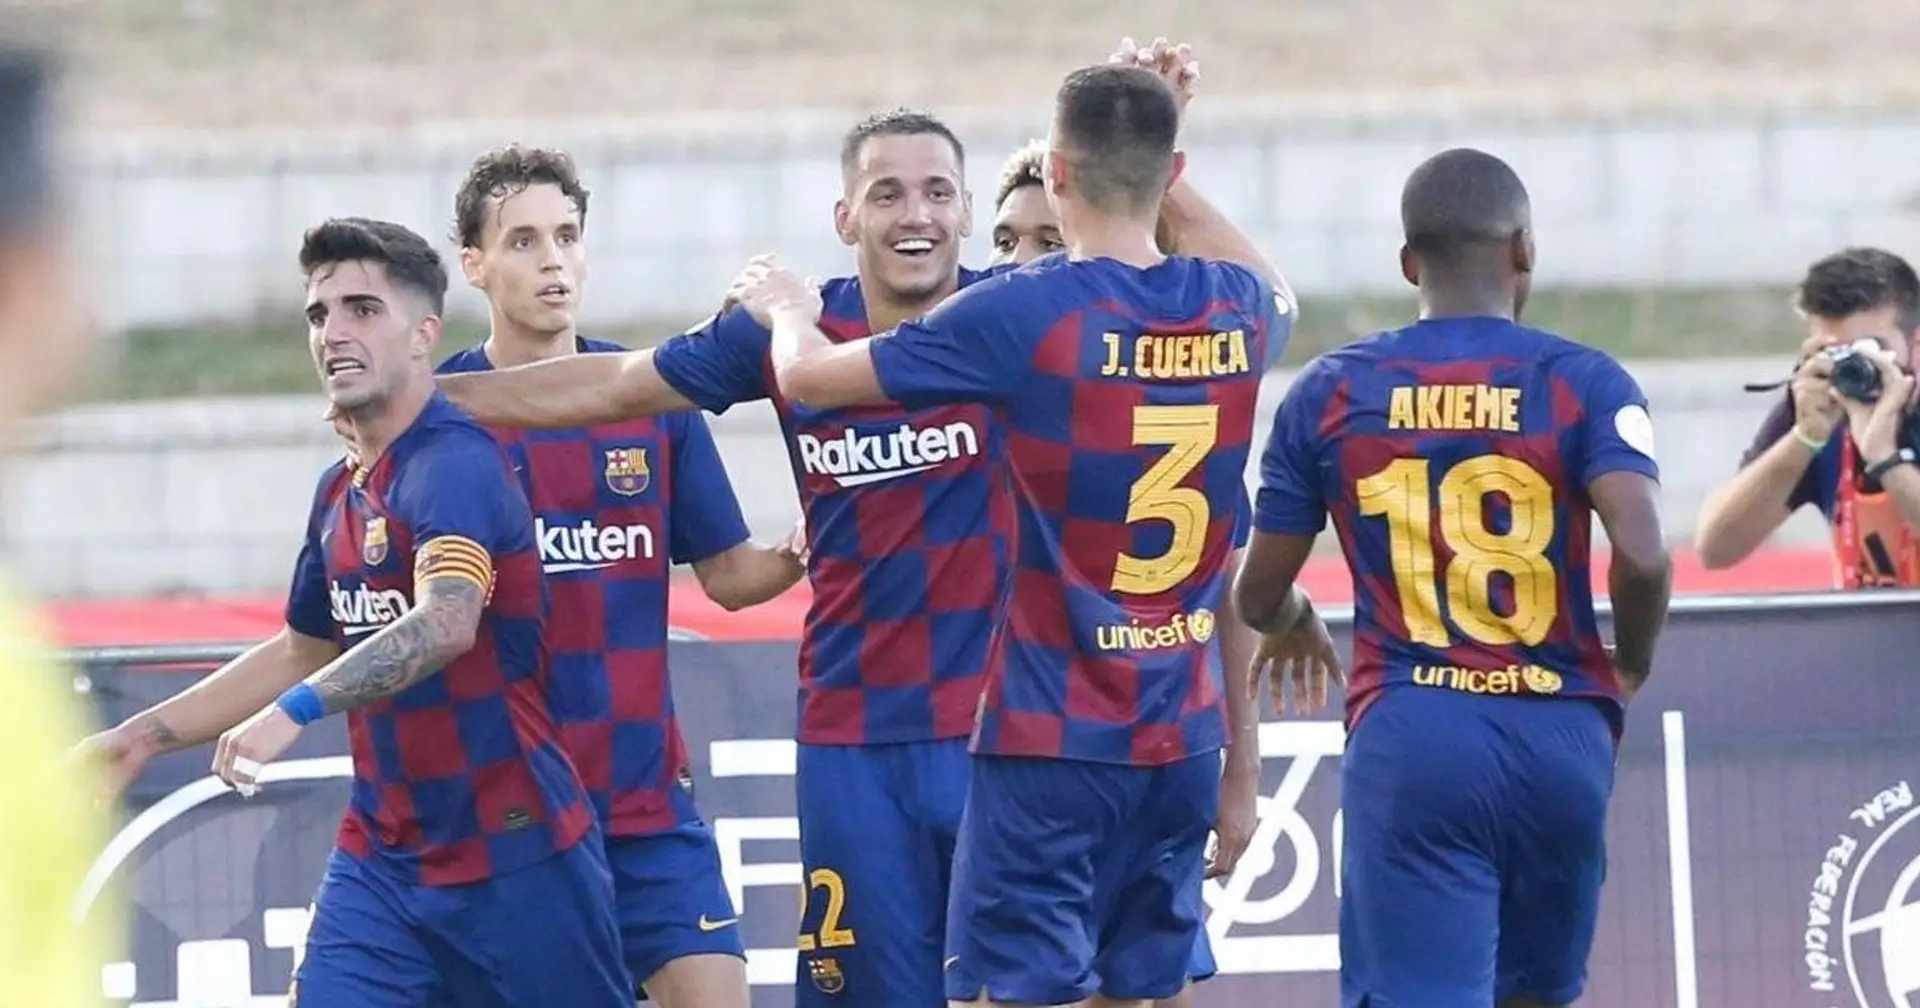 4 former Barca B stars reportedly claim €40,000 in unpaid bonuses for reaching promotional playoff